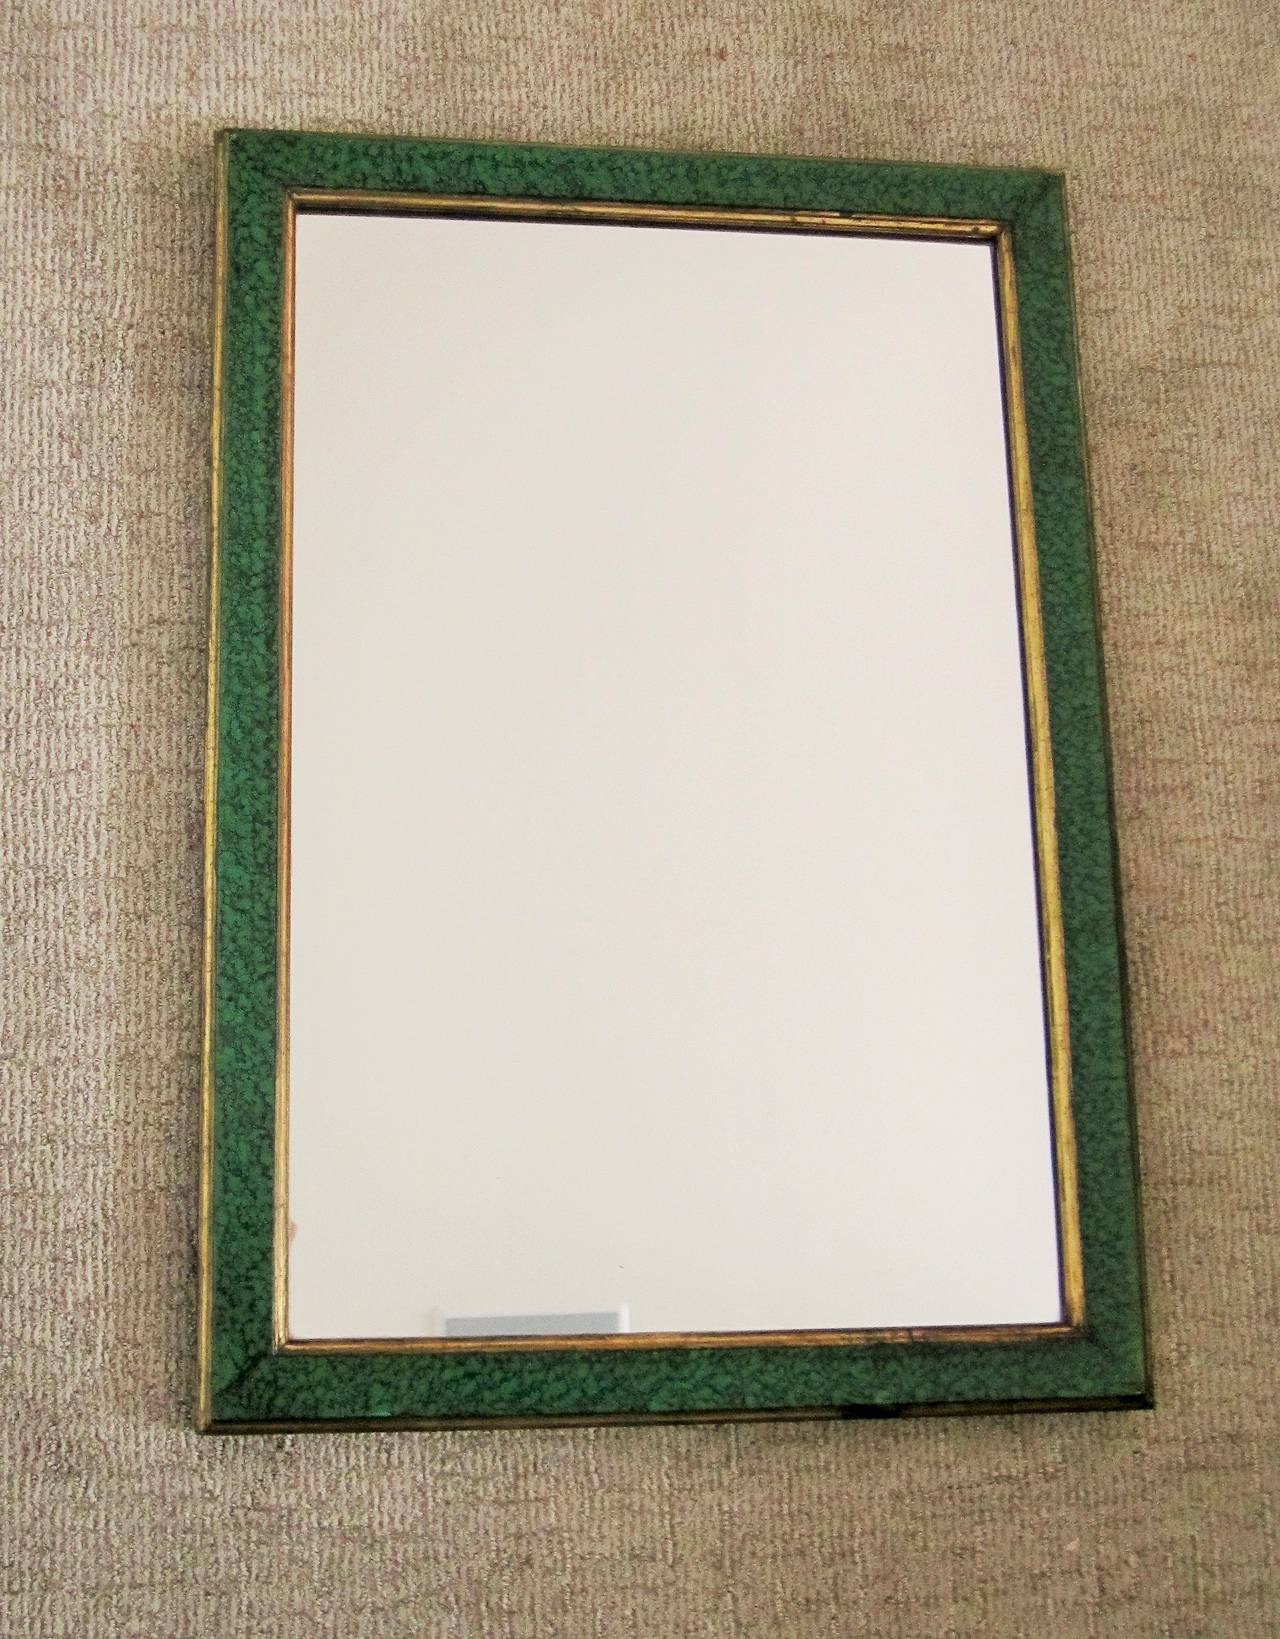 A beautiful and chic green malachite-style lacquer and gold giltwood framed rectangular wall mirror, circa 1970s Modern. Mirror can hang horizontally or vertically. Mirror is prepared to hang vertically.

Mirror measures: 23.5